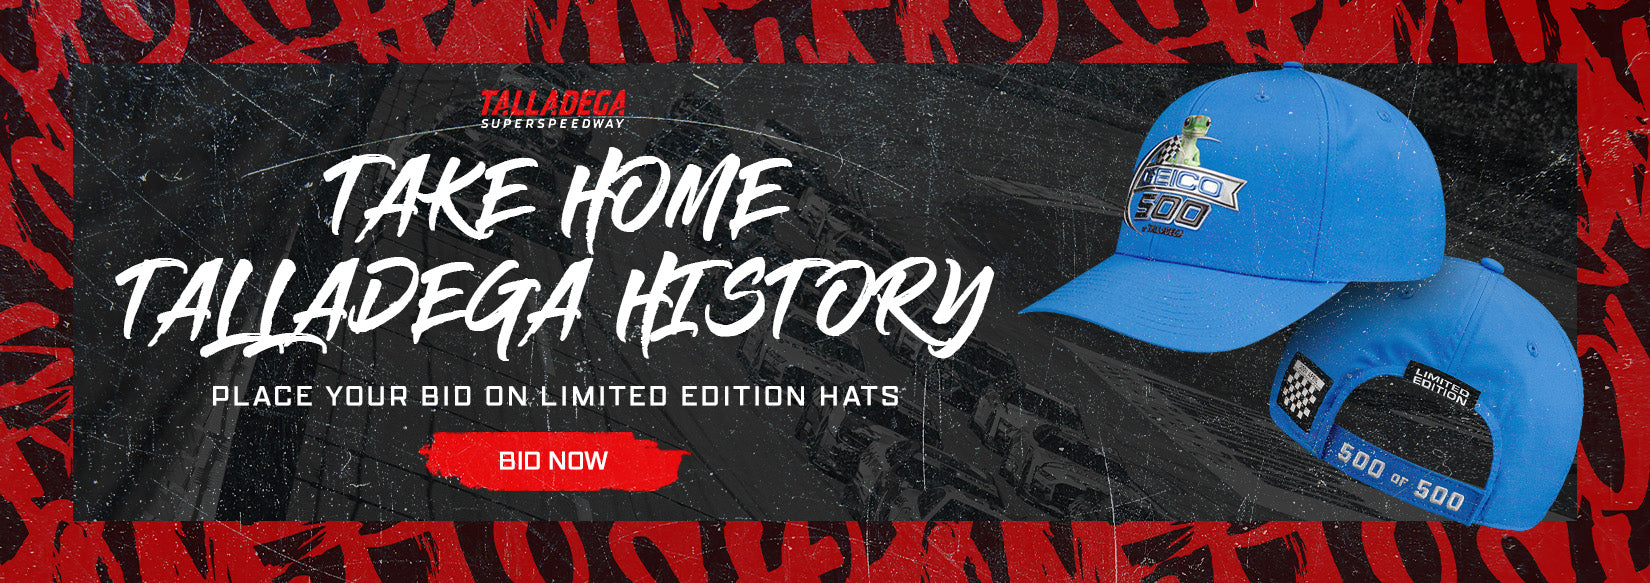 Take Home Talladega History - Place Your Bid on Limited Edition Hats - BID NOW